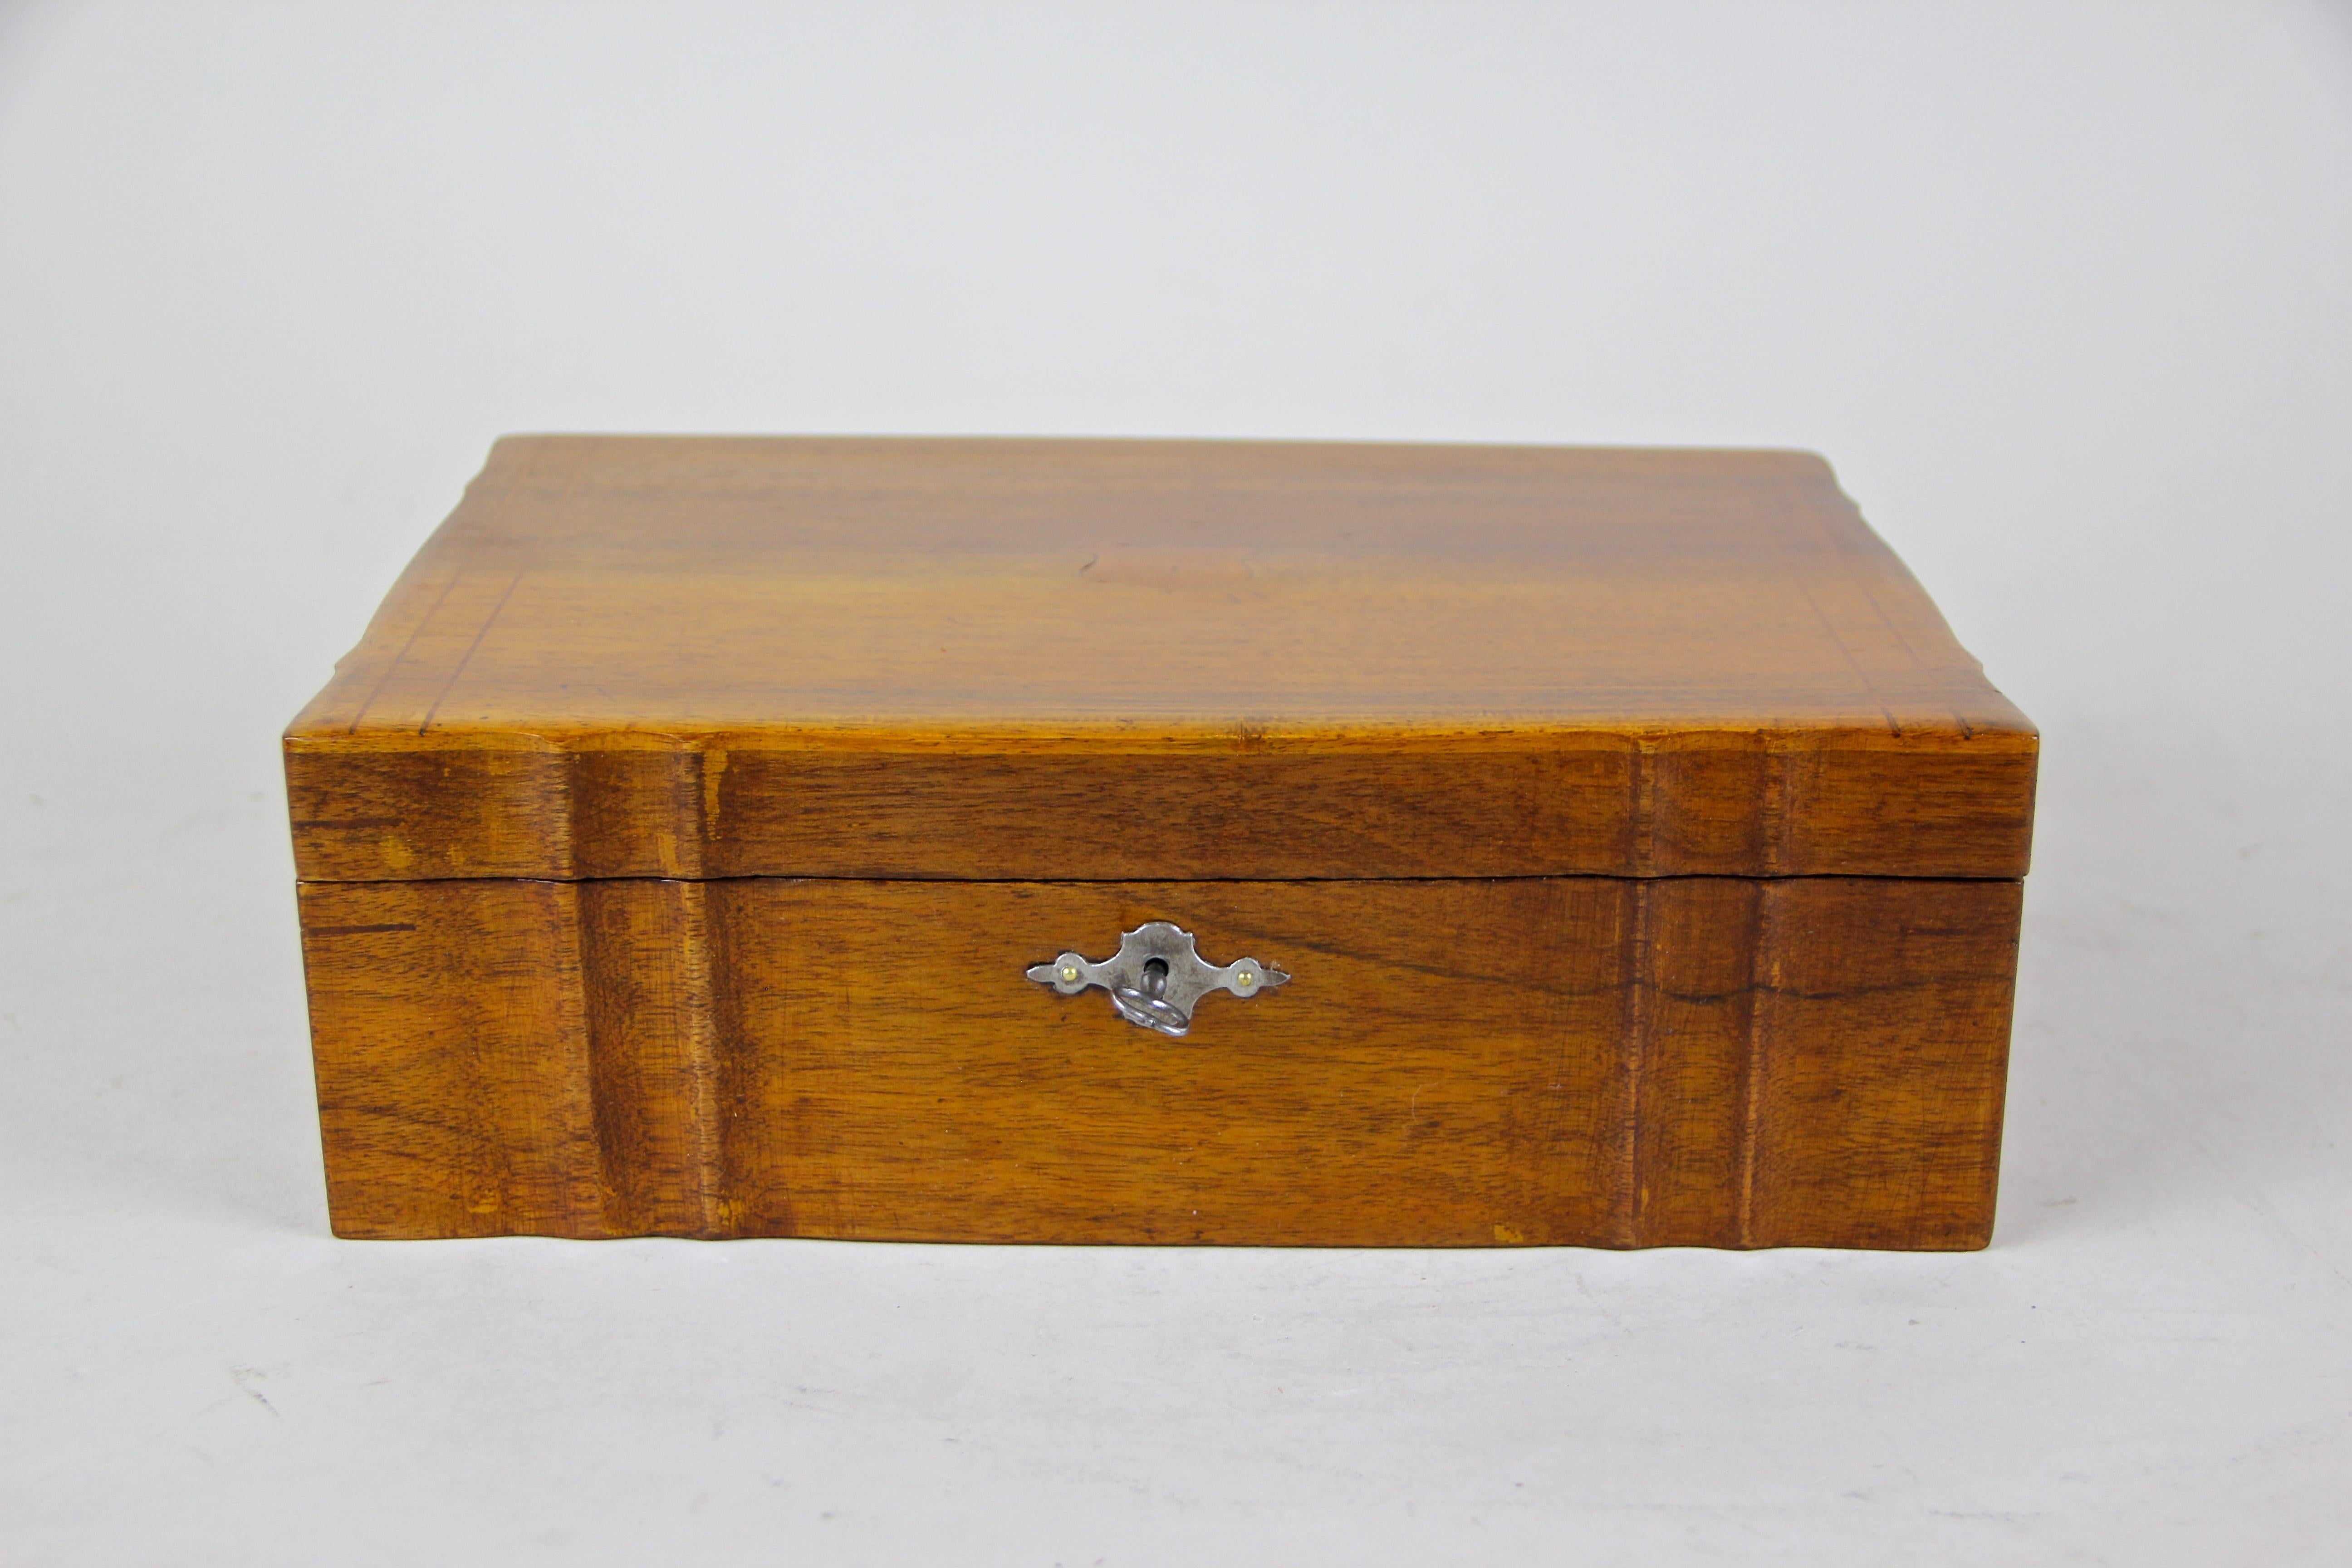 Lovely Biedermeier box veneered in fine nut wood. This nearly 170 year old wooden box shows nice maple threads inlays and a small coat arms on the lid. Coming with the original, fully functional lock, this box was preserved by a classic